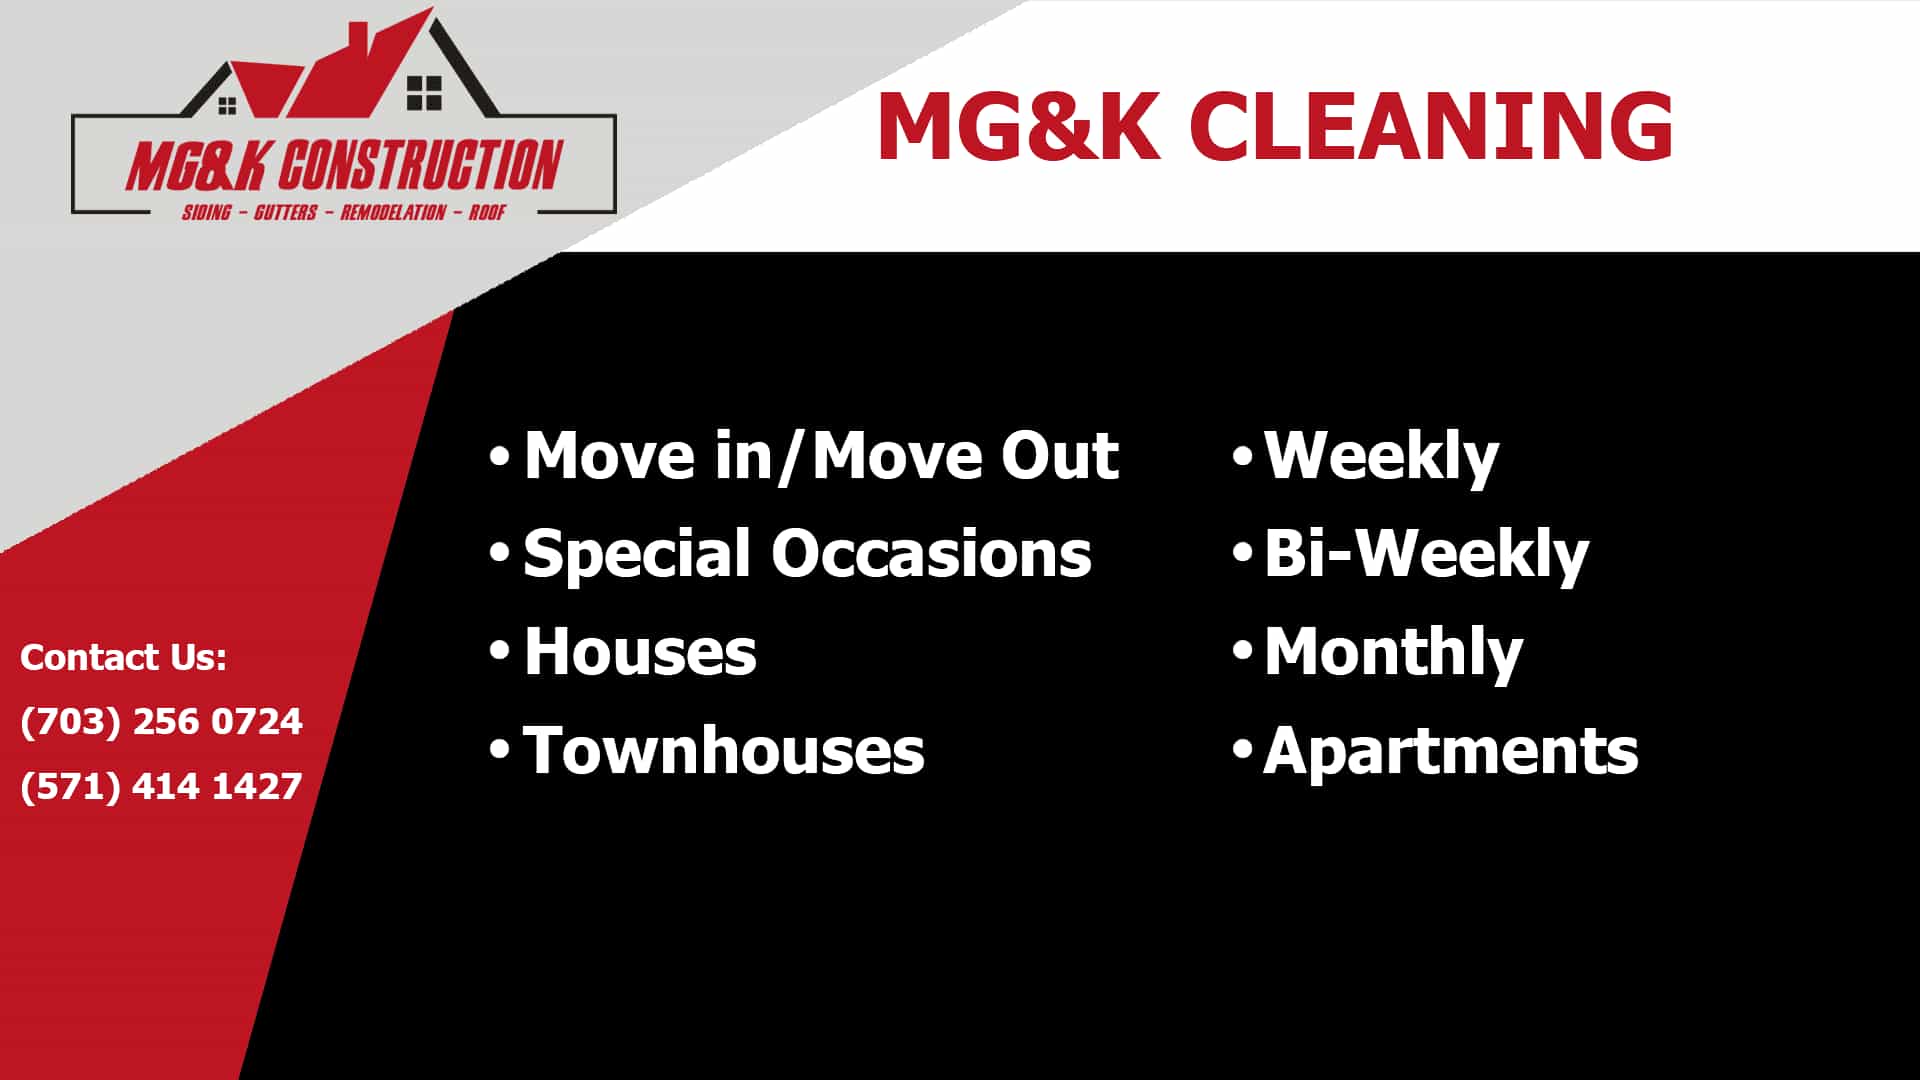 House cleaning services and maintenance